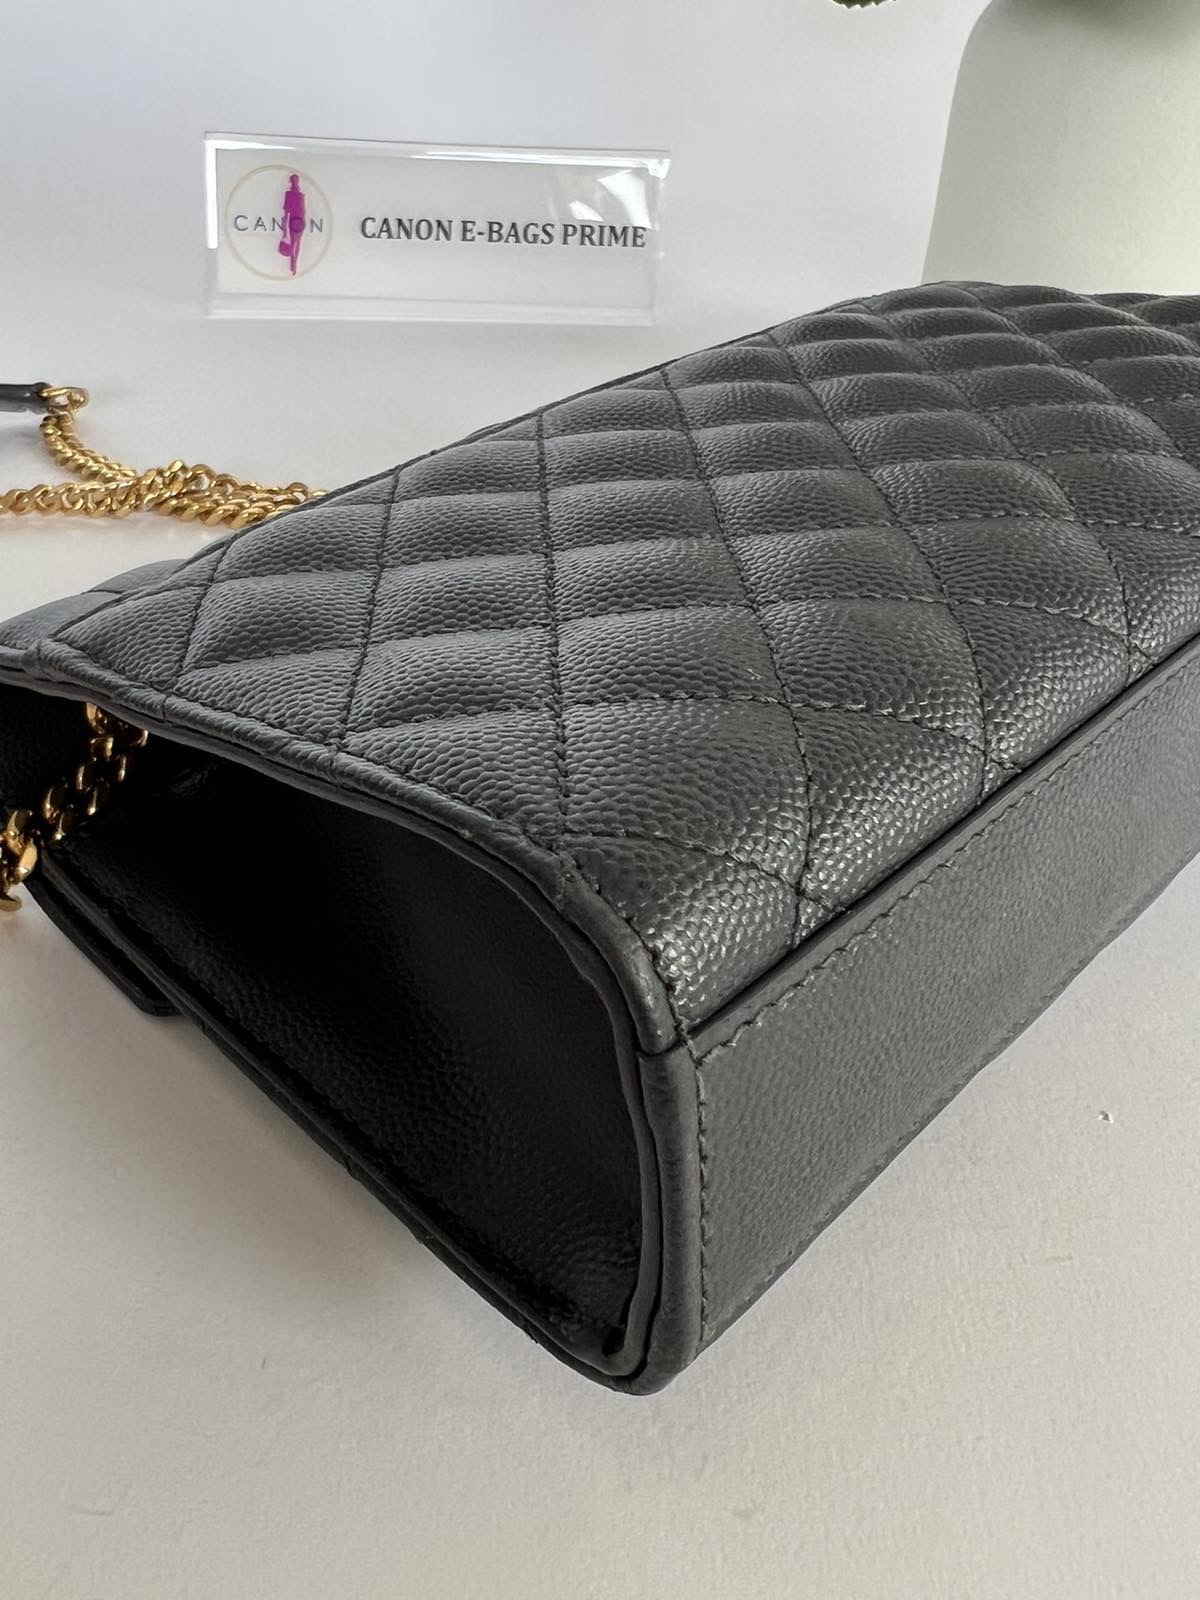 YSL Black Tri-Quilt Grained Leather Gold Hardware. Made in Italy. With authenticity  card, dustbag, box & certificate of authenticity from ENTRUPY ❤️ - Canon  E-Bags Prime